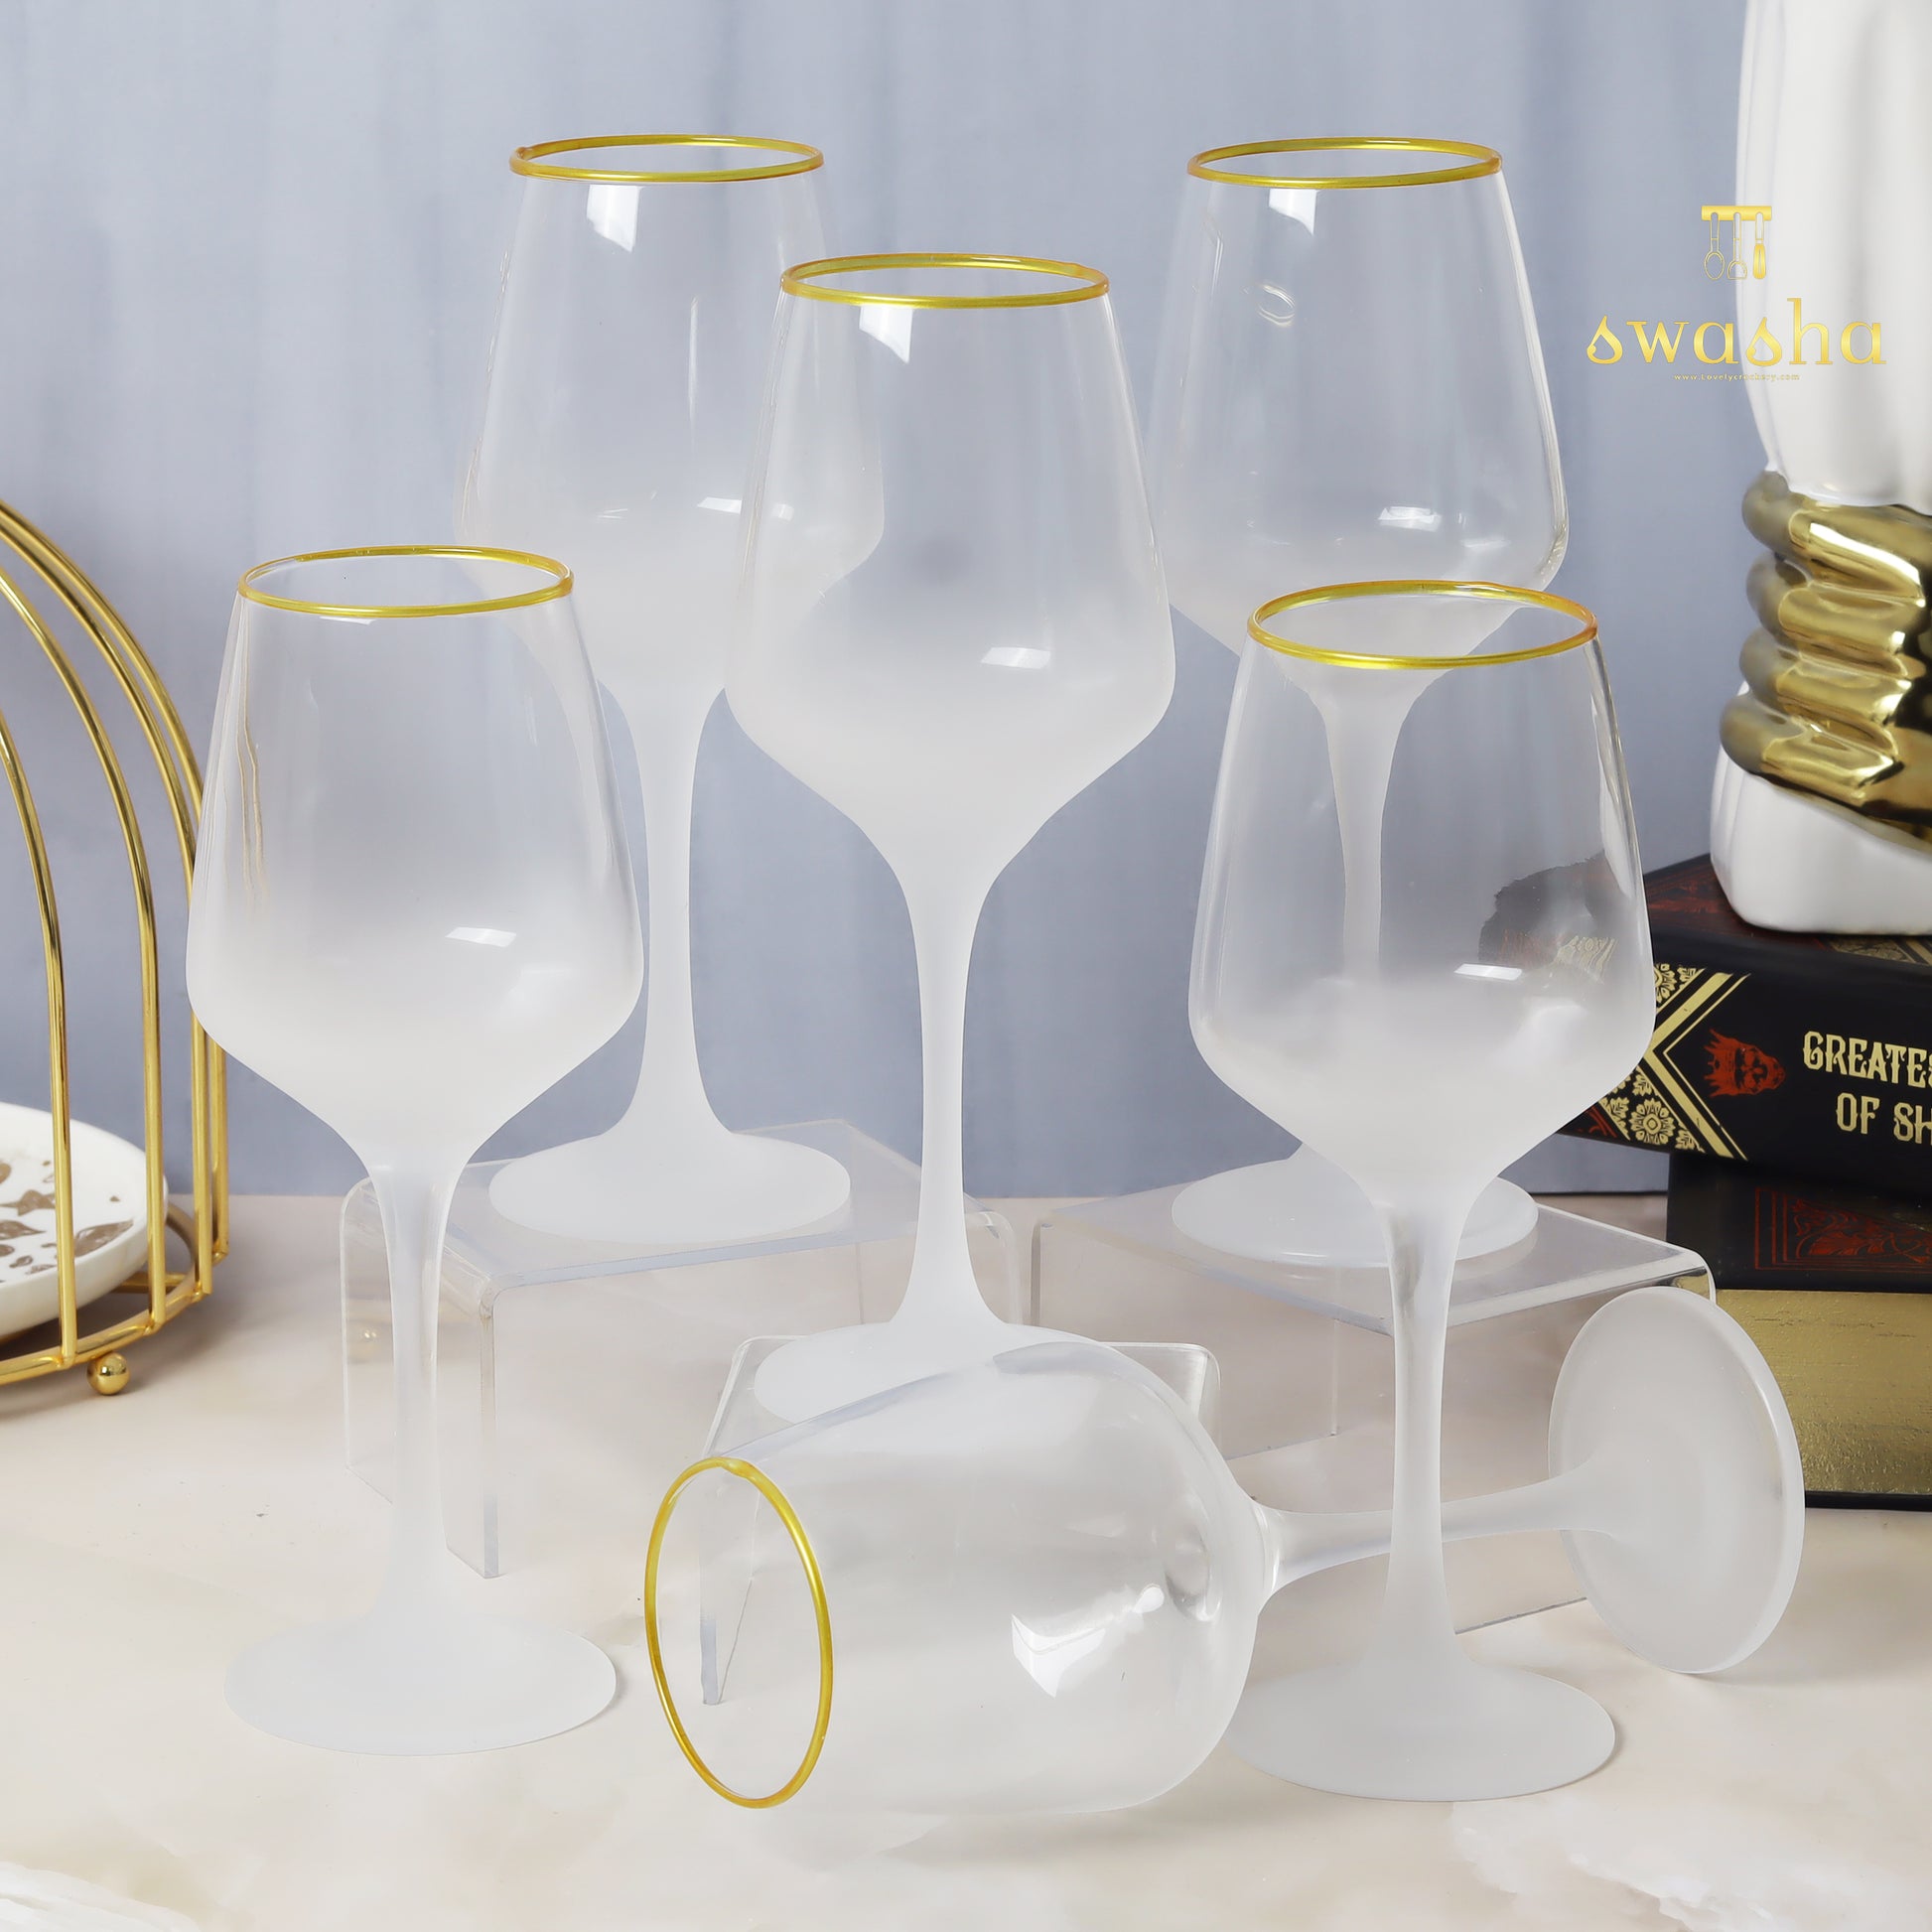 Set of 6 elegant frosted wine glasses - elevate your dining experience with this classic set